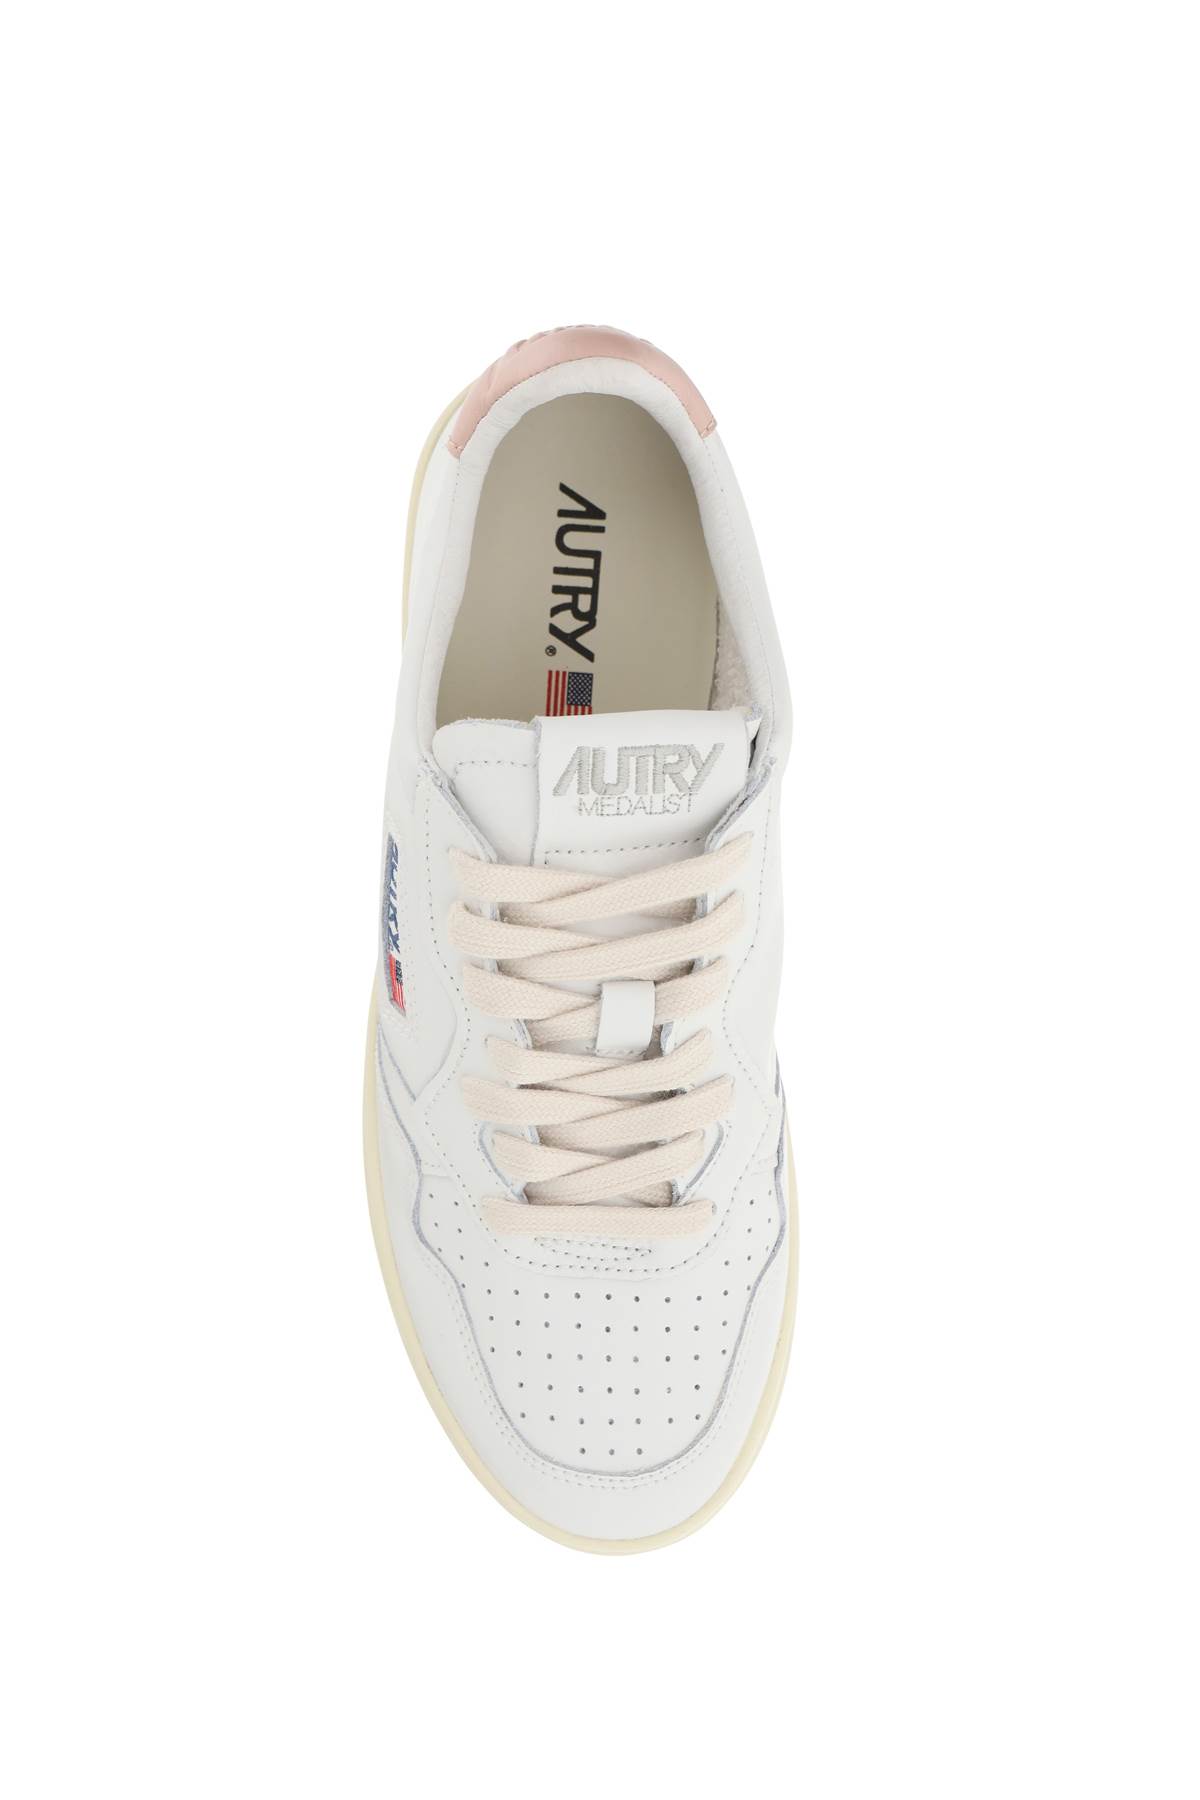 Shop Autry Leather Medalist Low Sneakers In White Pink (white)